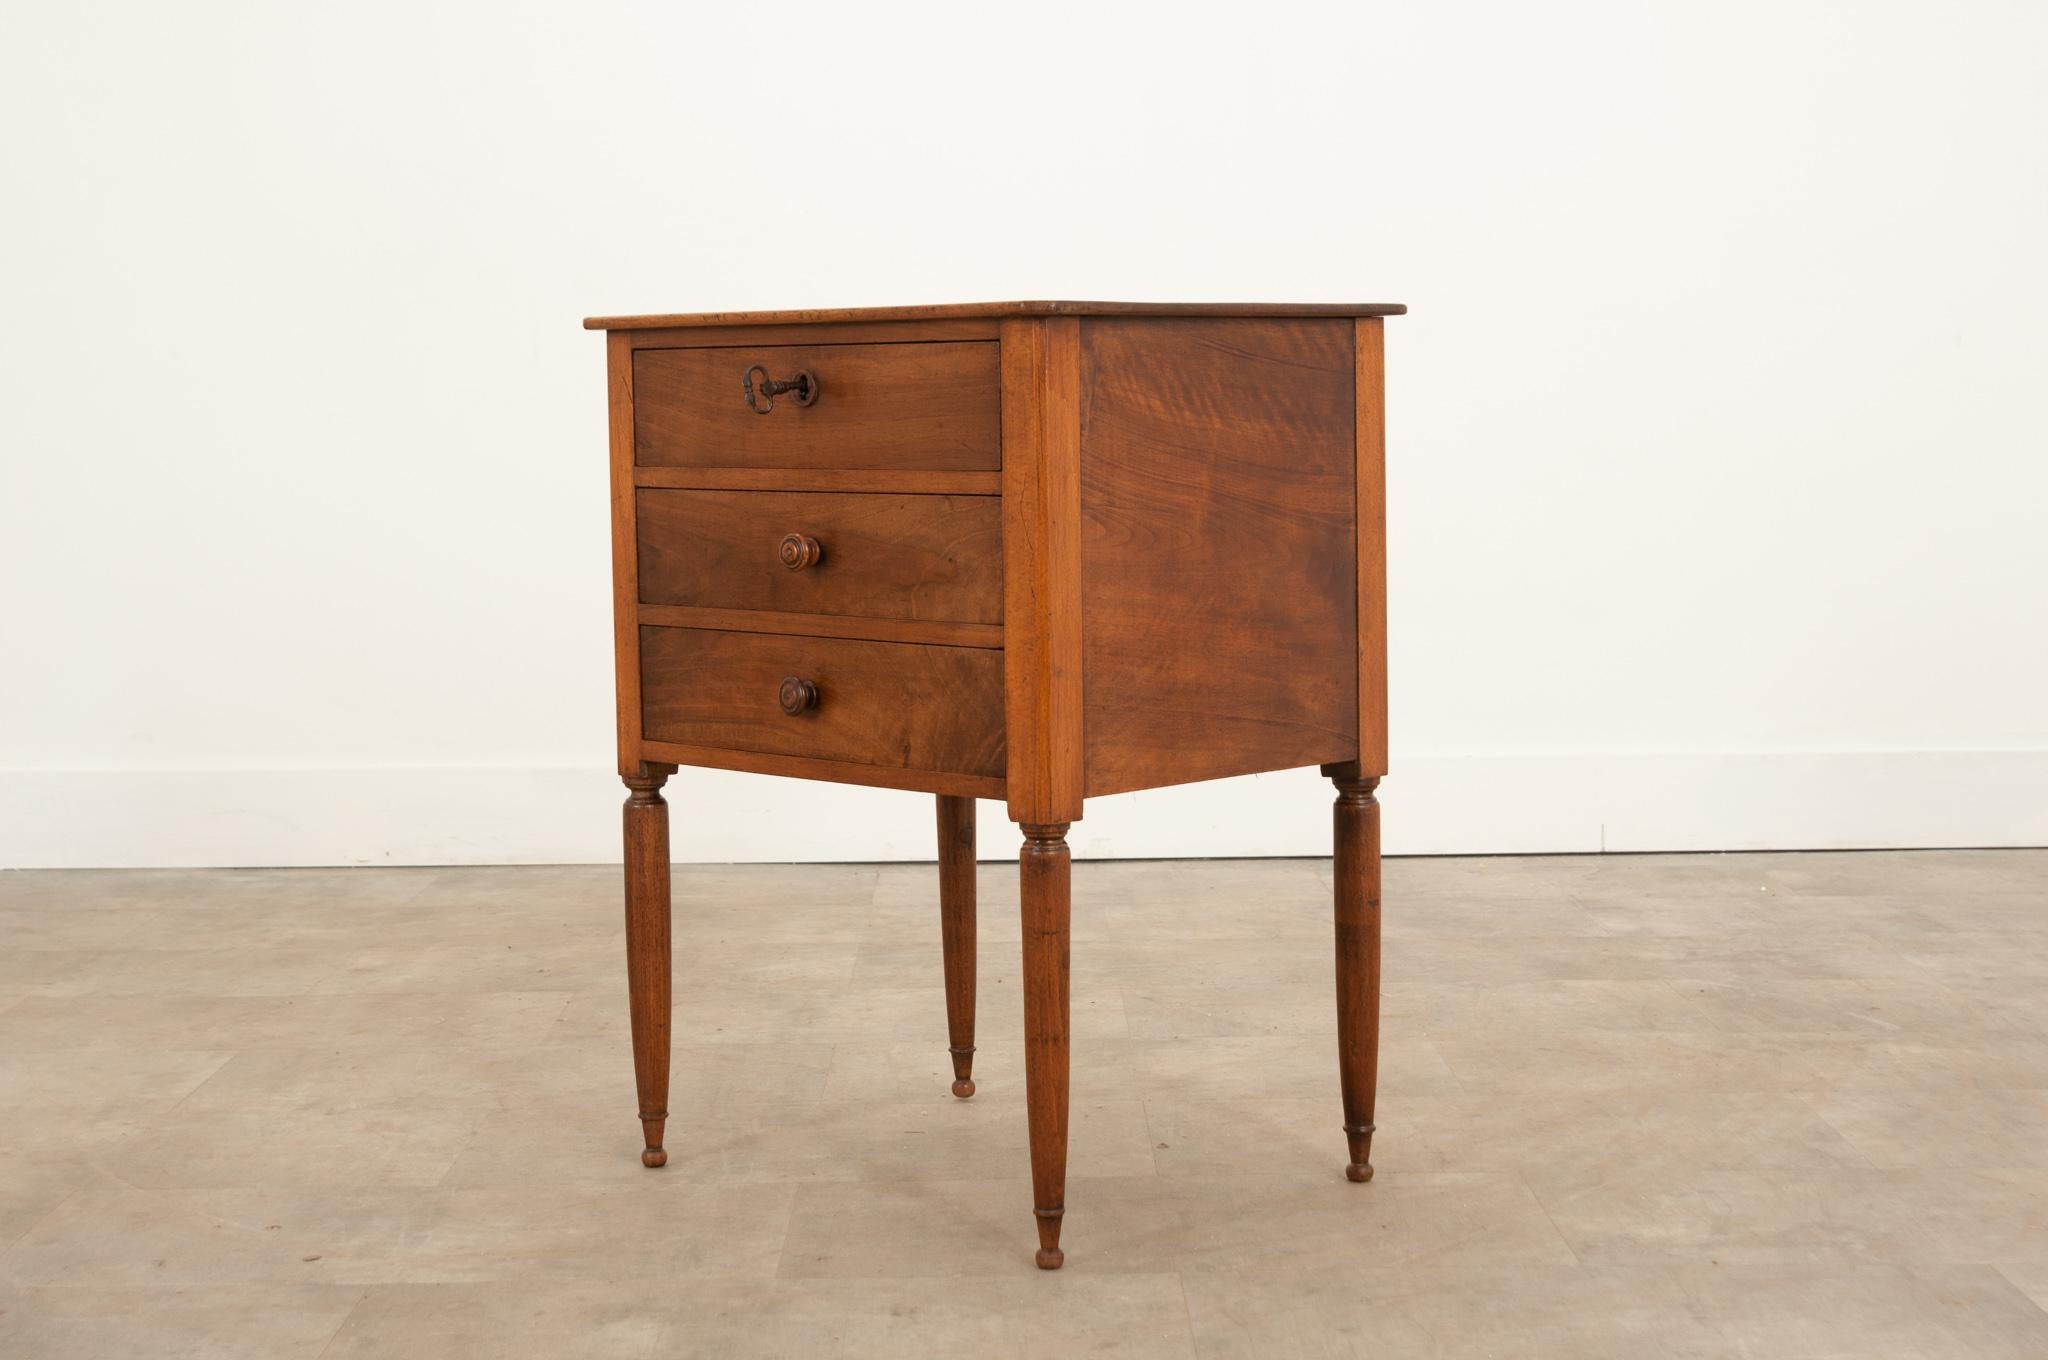 This darling commode was crafted from a richly toned walnut during the 1880s in France. The whole has been recently cleaned and waxed with French wax paste and showcases a fine patina. A bank of three drawers compose the petite body. The top drawer